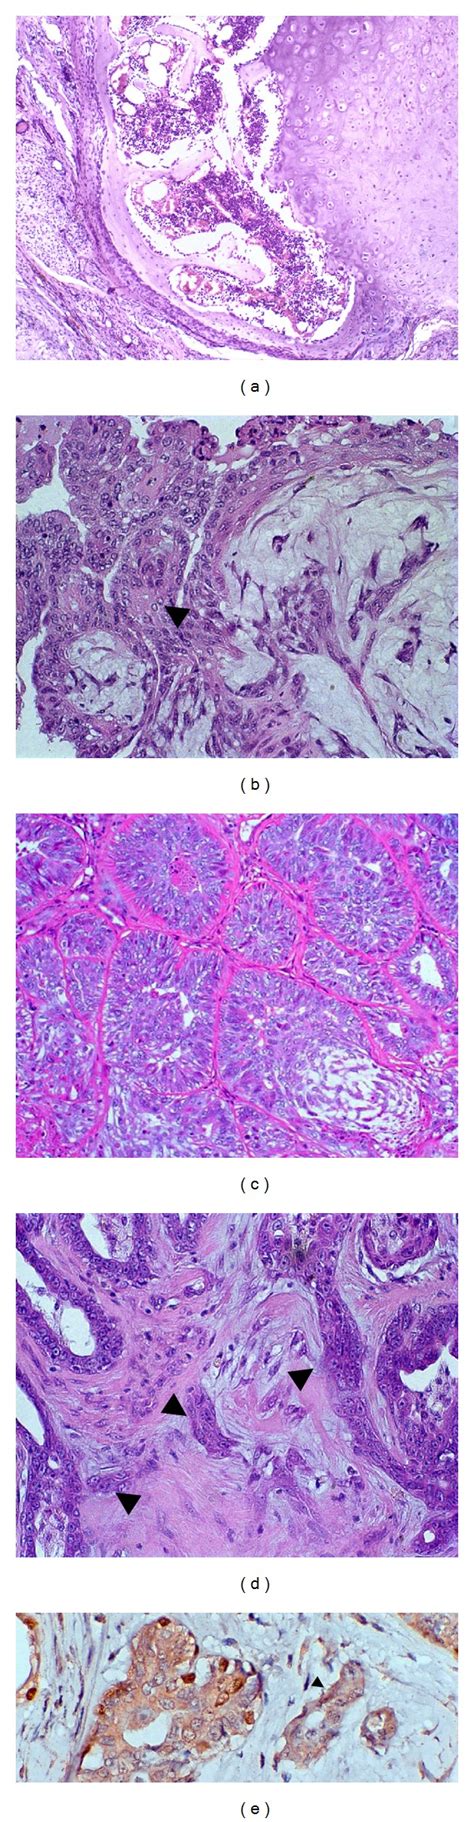 A Benign Mixed Tumor In Canine Mammary Gland Presenting Chondroid And